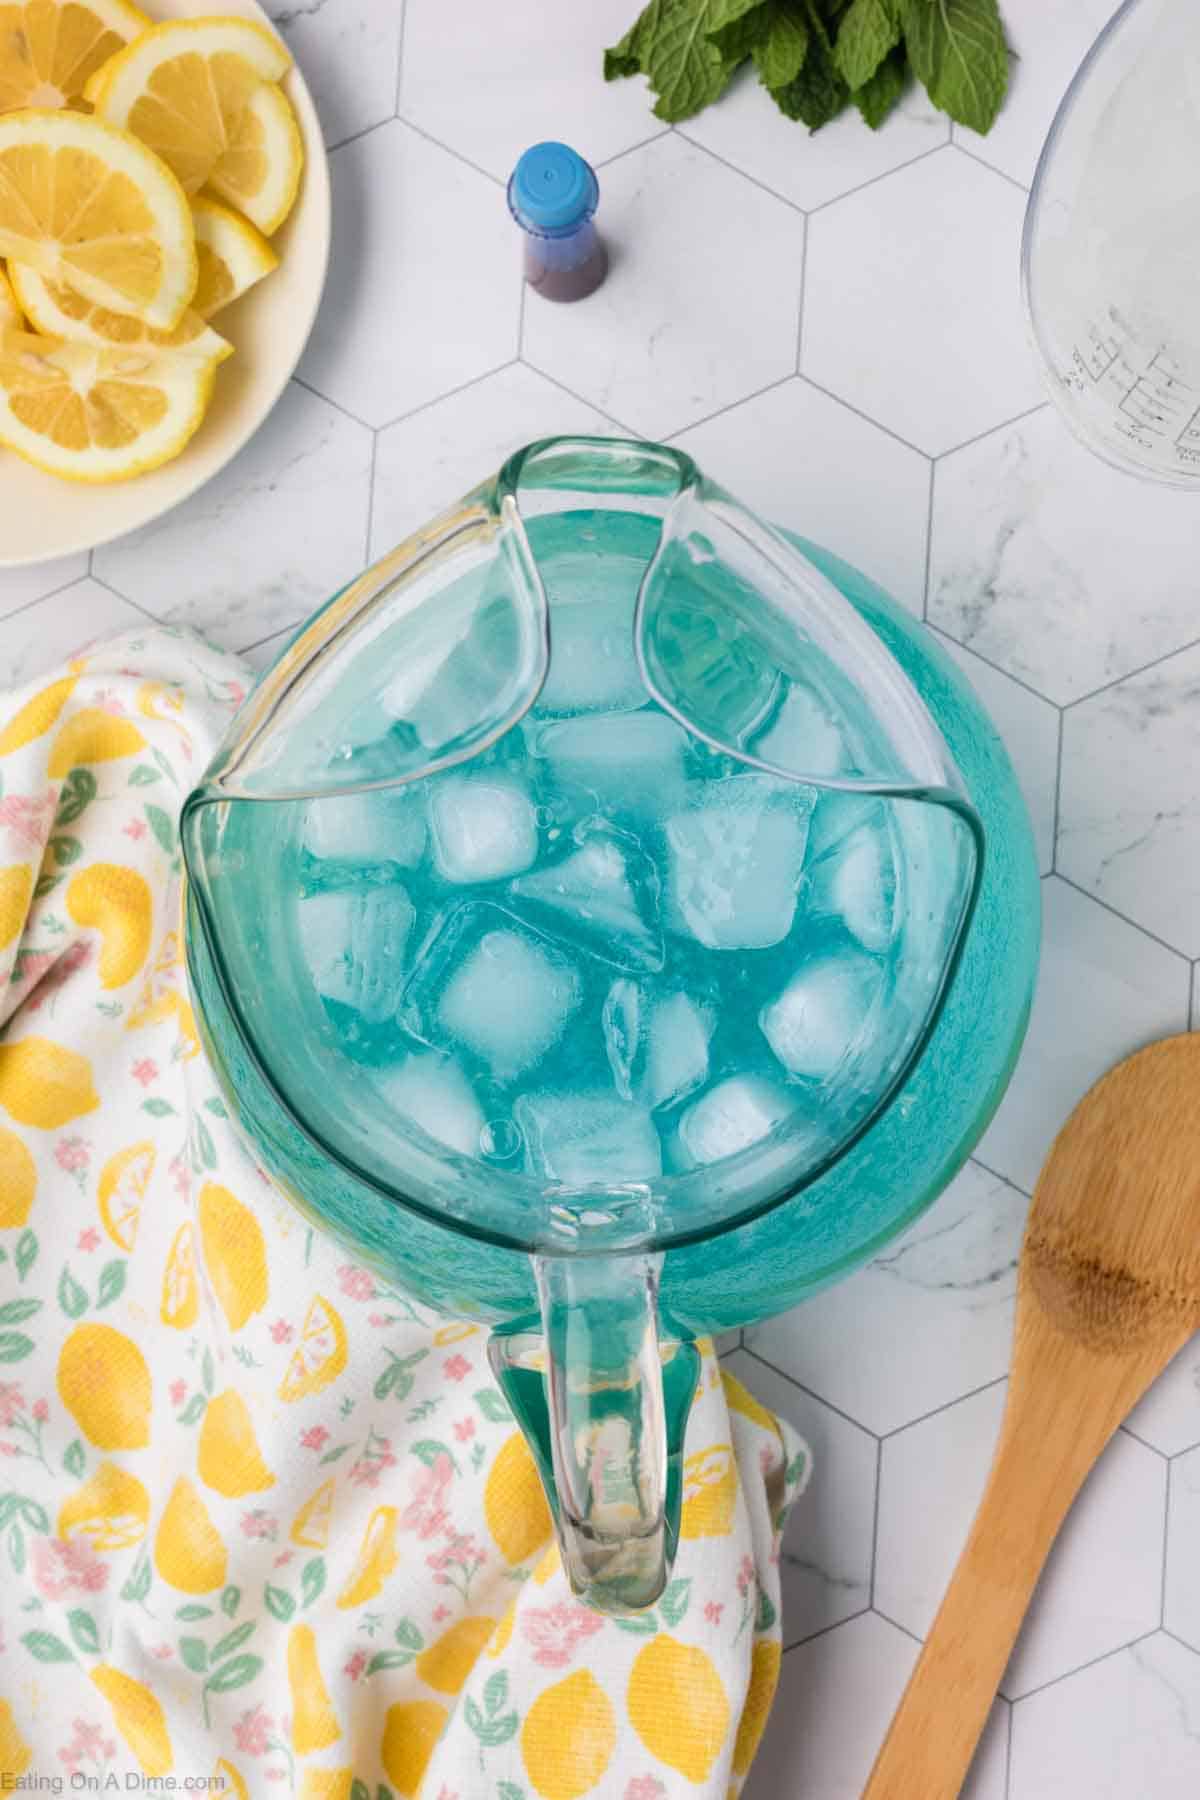 blue lemonade in a glass pitcher with ice